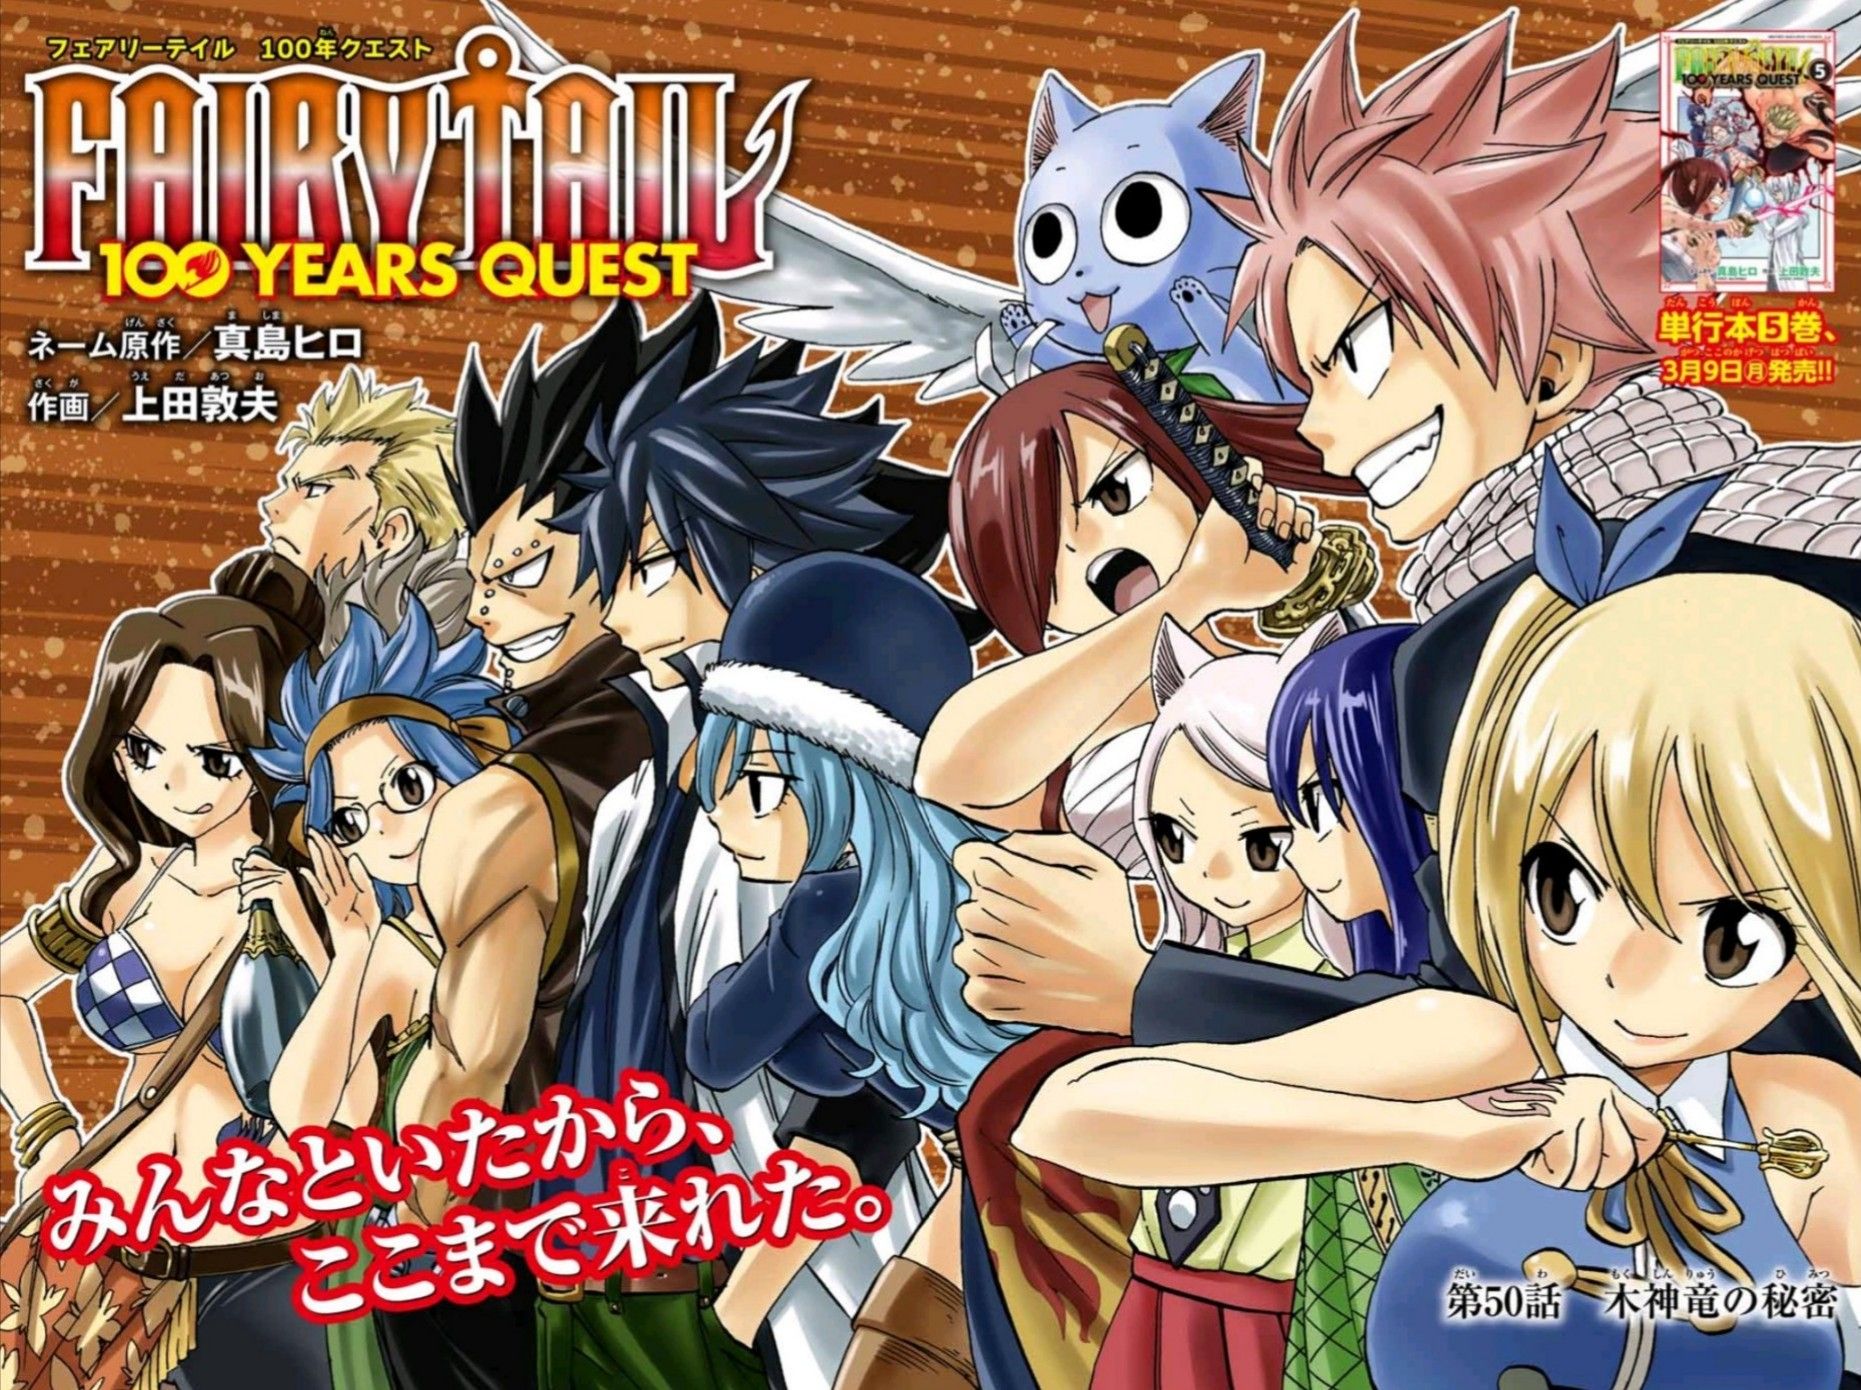 Fairy Tail: 100 Years Quest Chapter 50 | Fairy Tail Wiki | Fandom